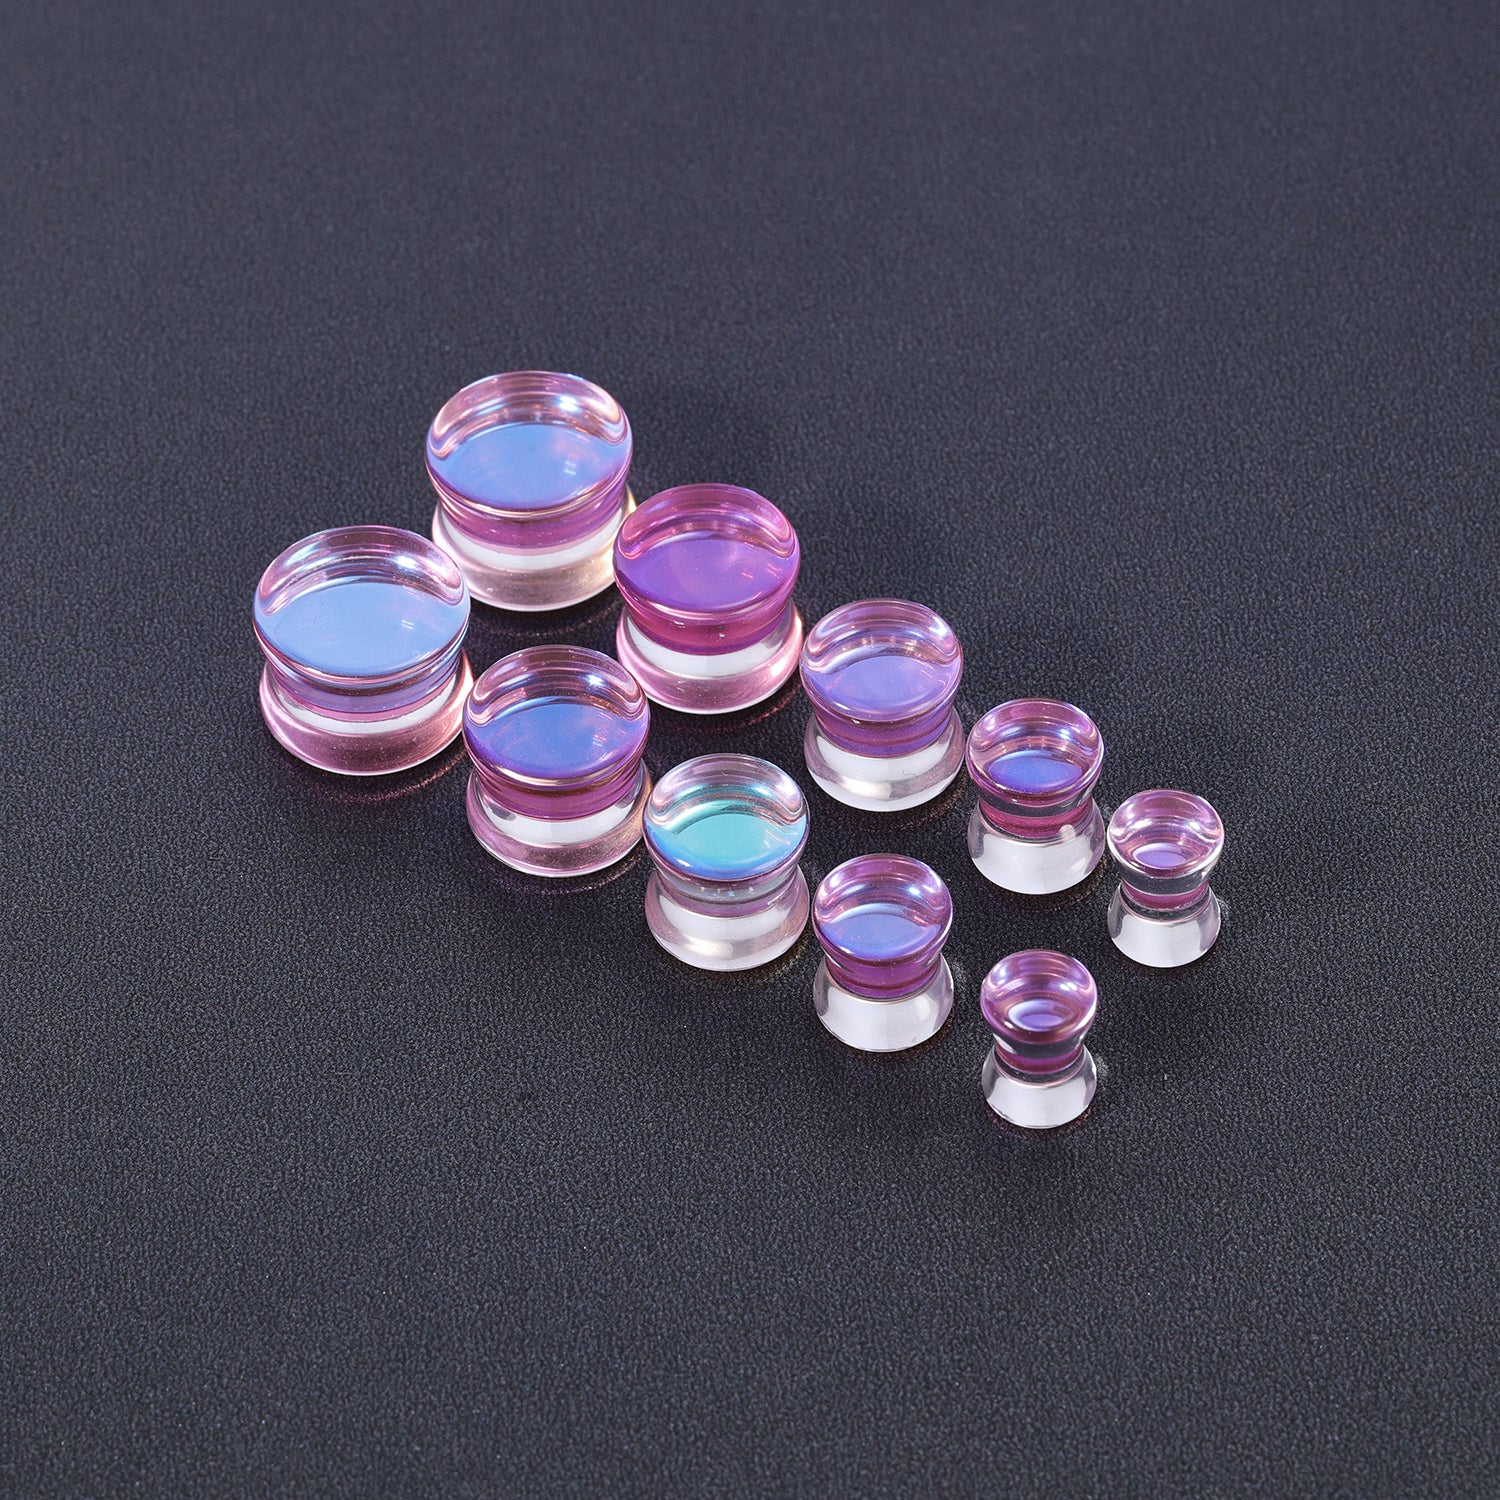 1 Pair 6-14mm Ear Plug Tunnel Pink Glass Ear Expanders Double Flare Ear Gauges